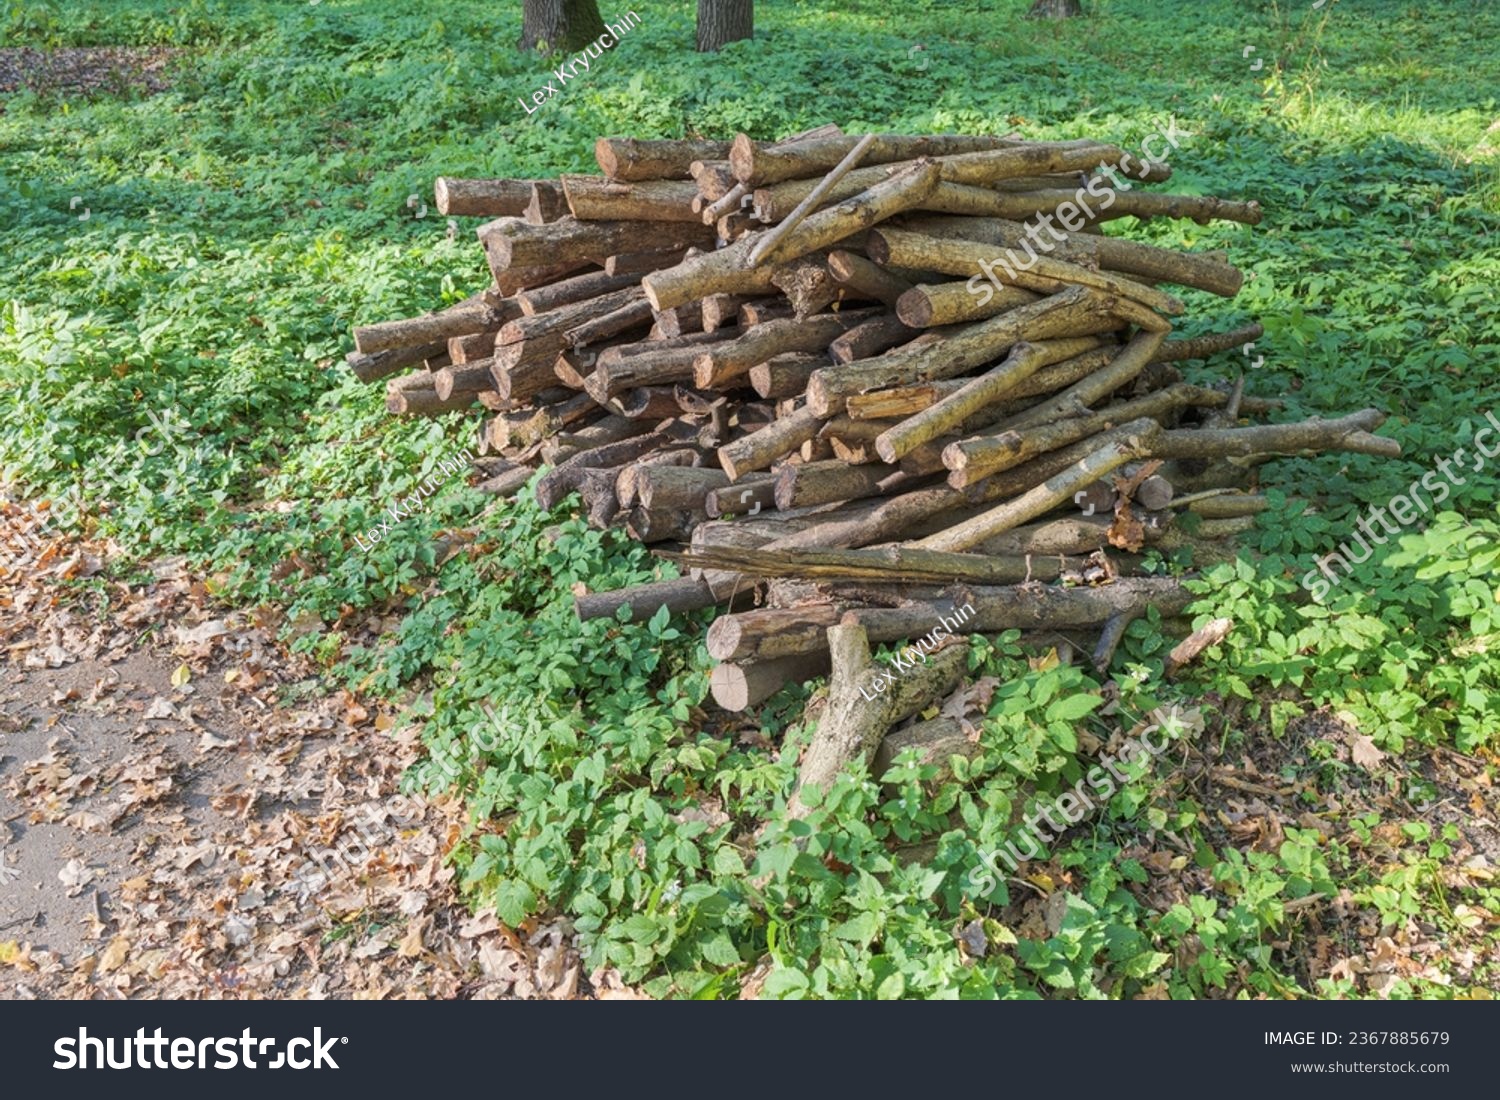 A pile of sawn dry trees and branches in a park or forest. Dry twigs pile ready for campfire, sticks, brushwood #2367885679